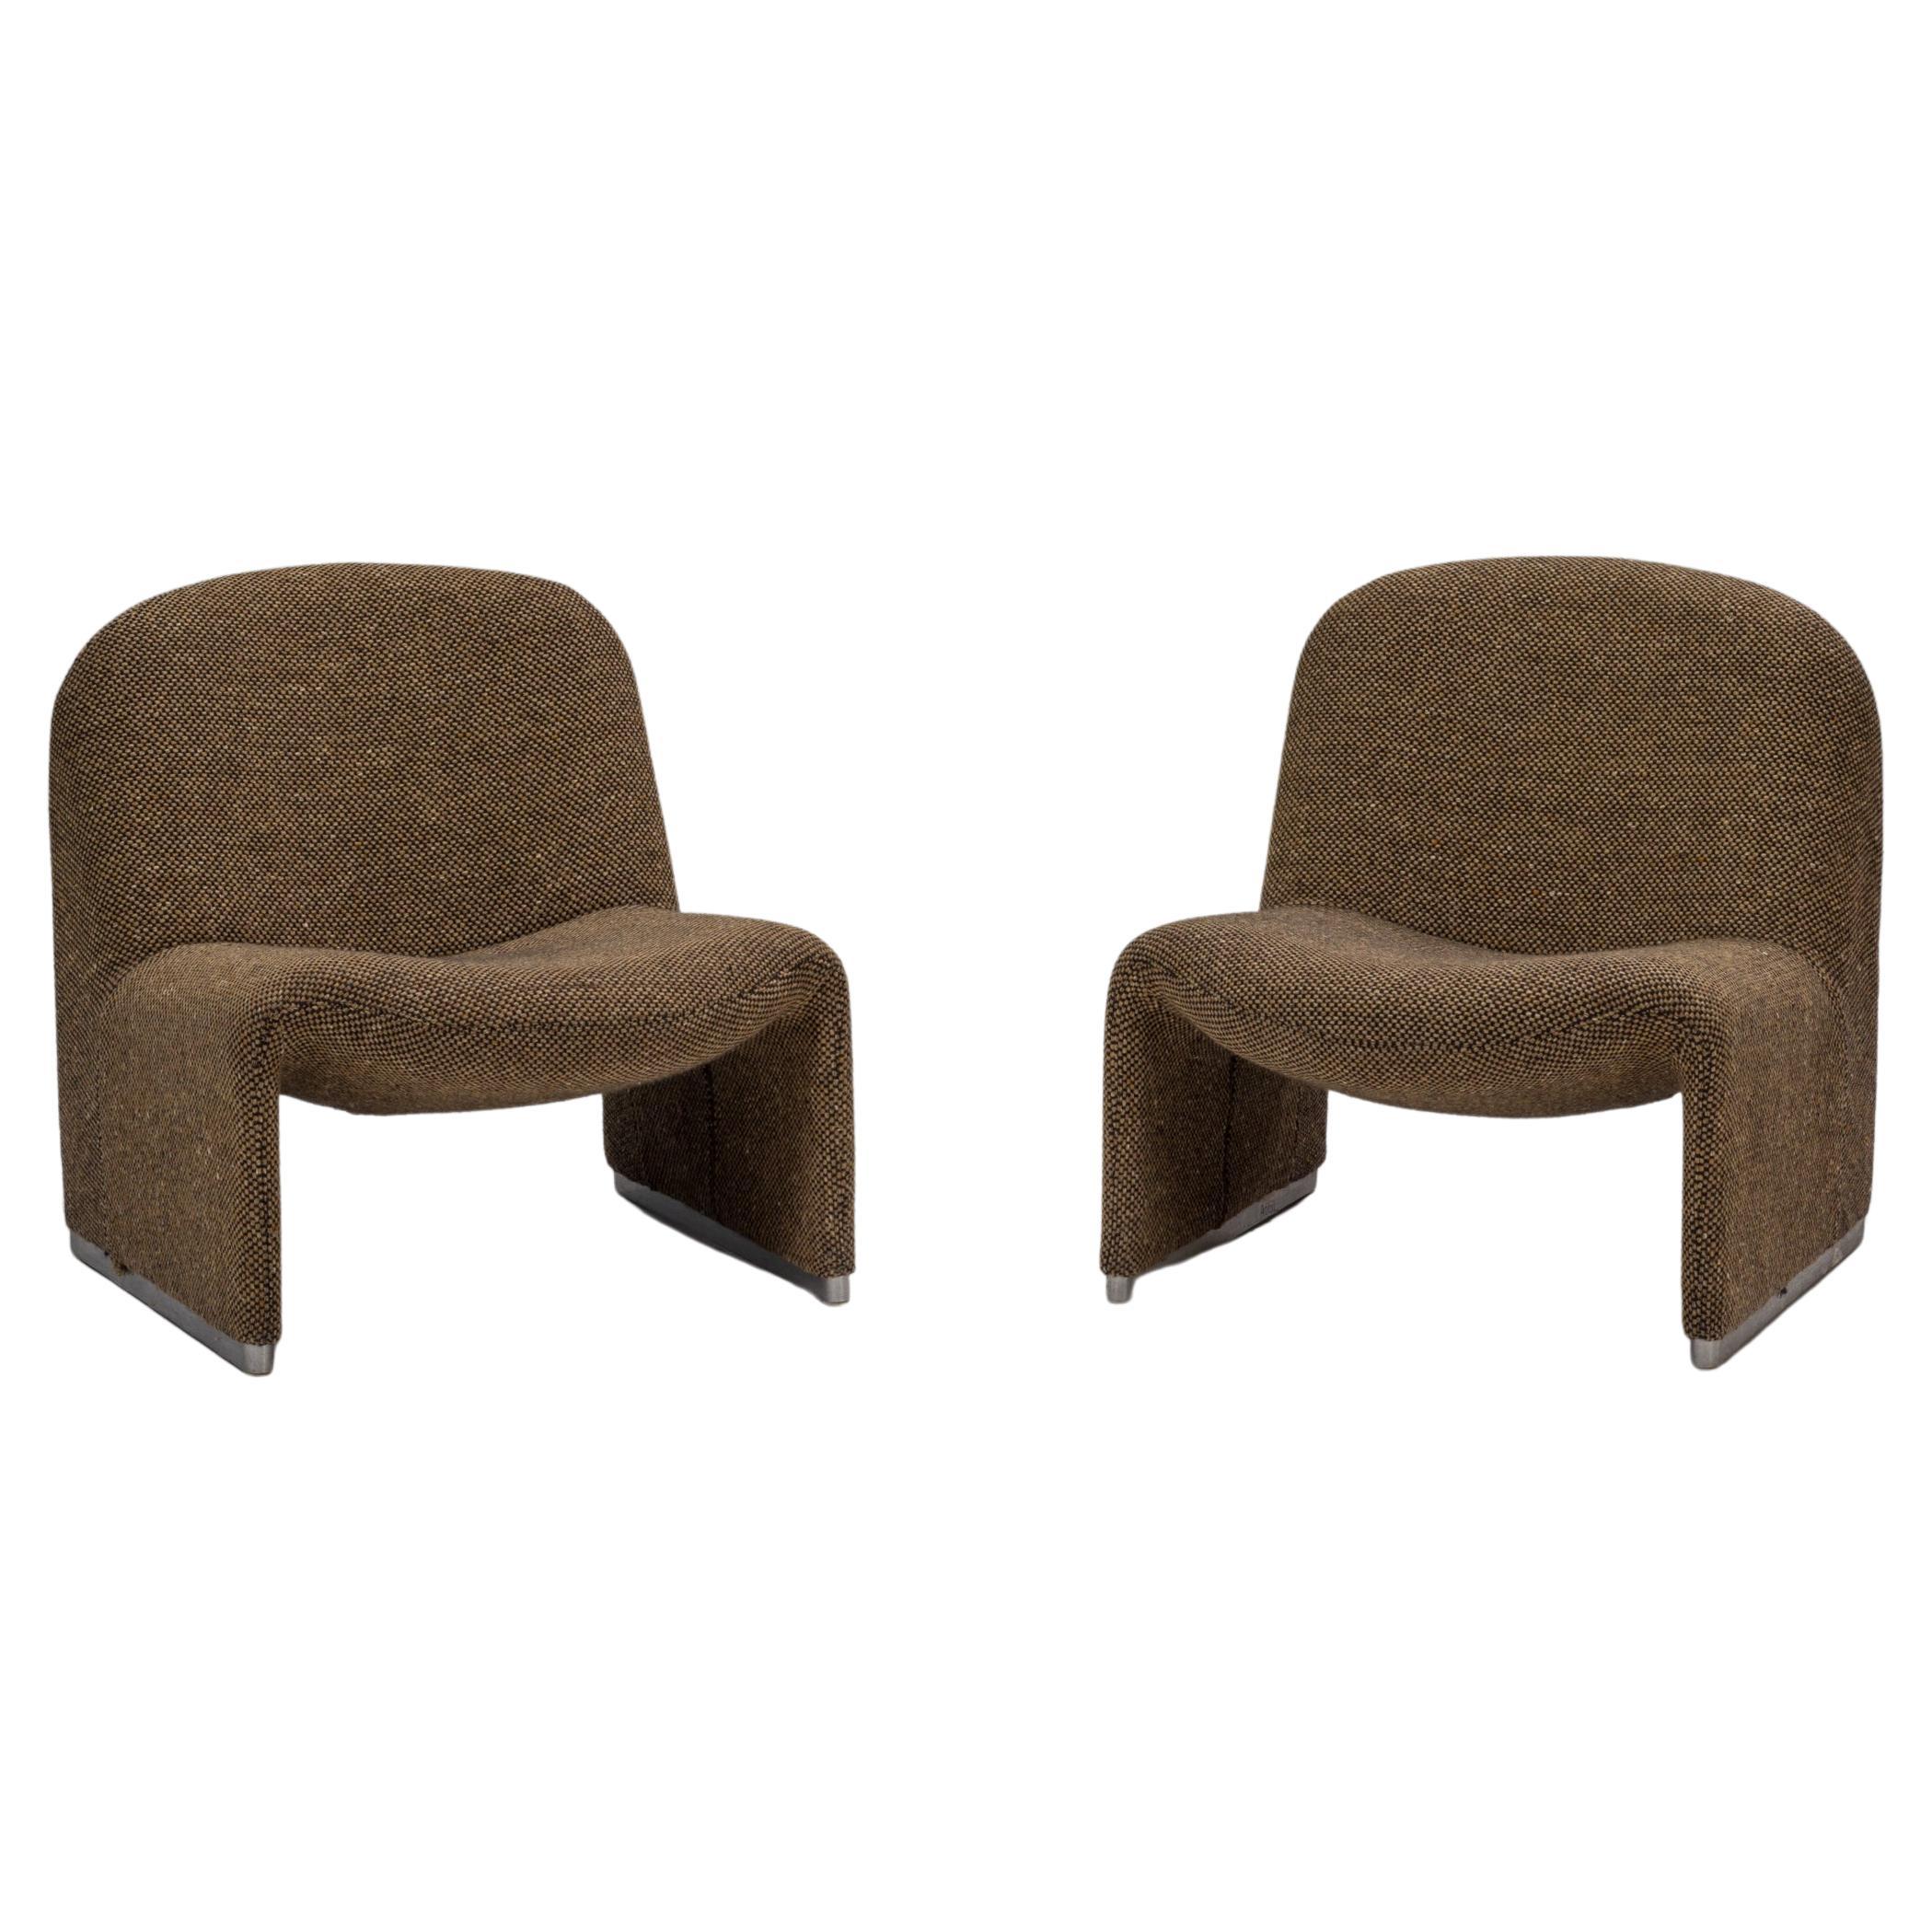 Giancarlo Piretti for Artifort Brown Tweed Alky Chairs, 1970s, Set of 2